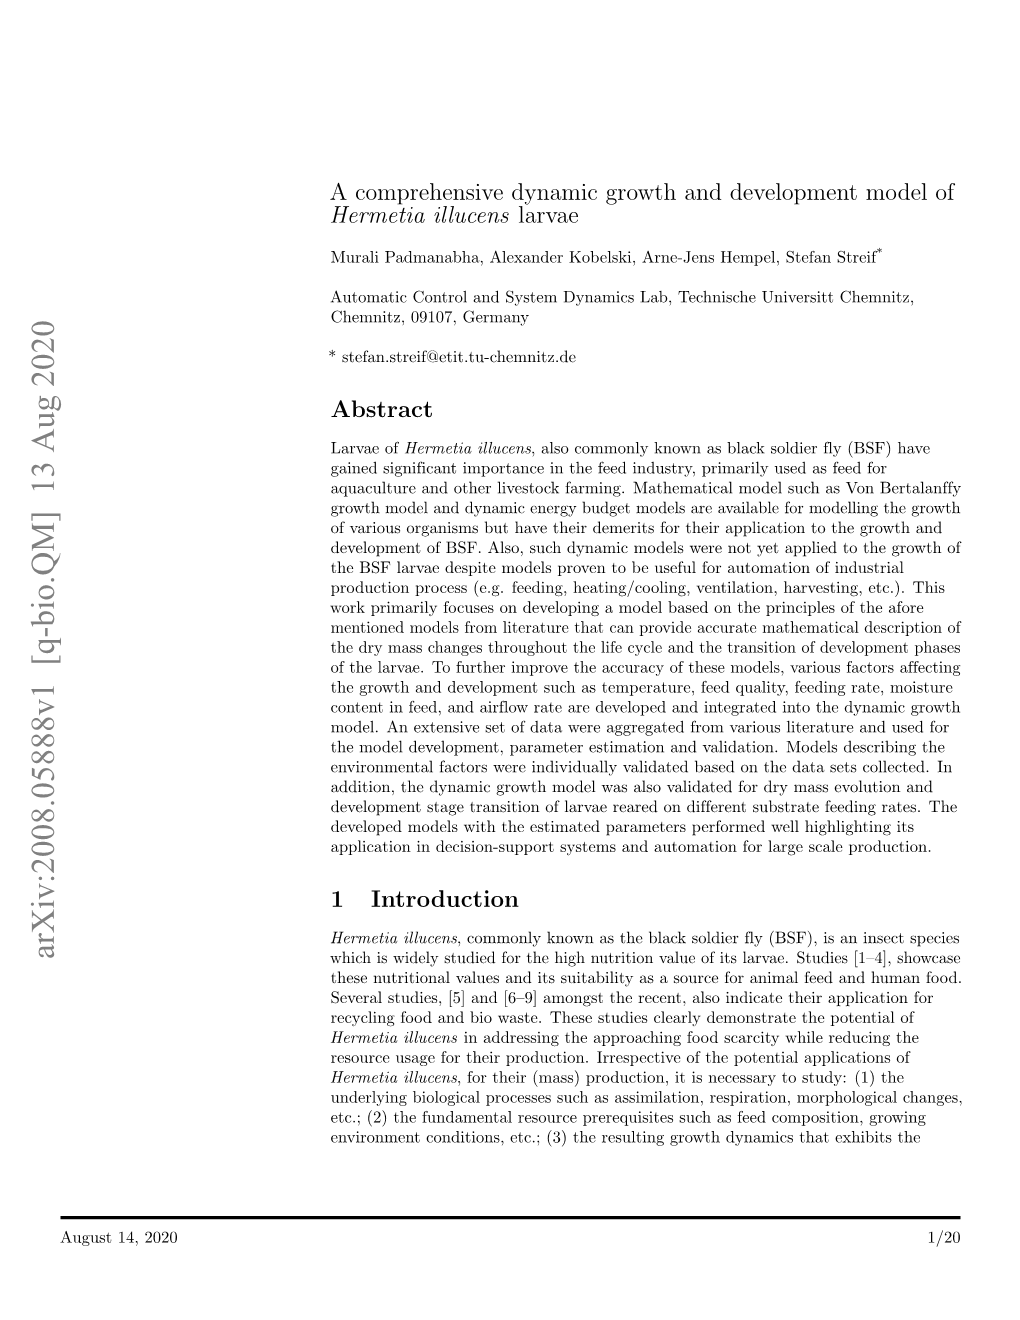 A Comprehensive Dynamic Growth and Development Model of Hermetia Illucens Larvae